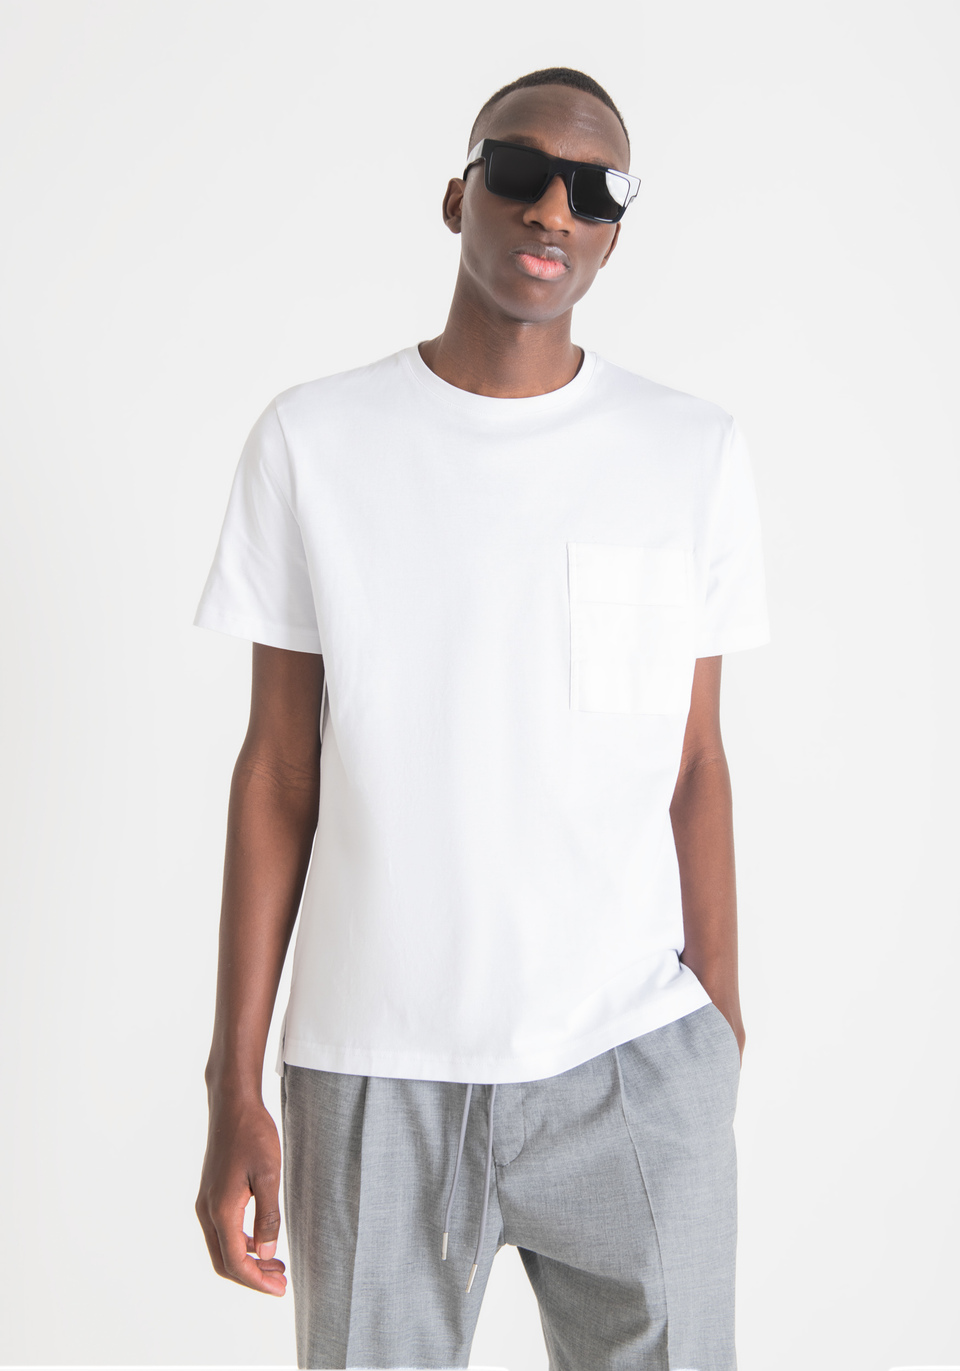 REGULAR-FIT T-SHIRT IN PURE COTTON WITH POCKET - Antony Morato Online Shop